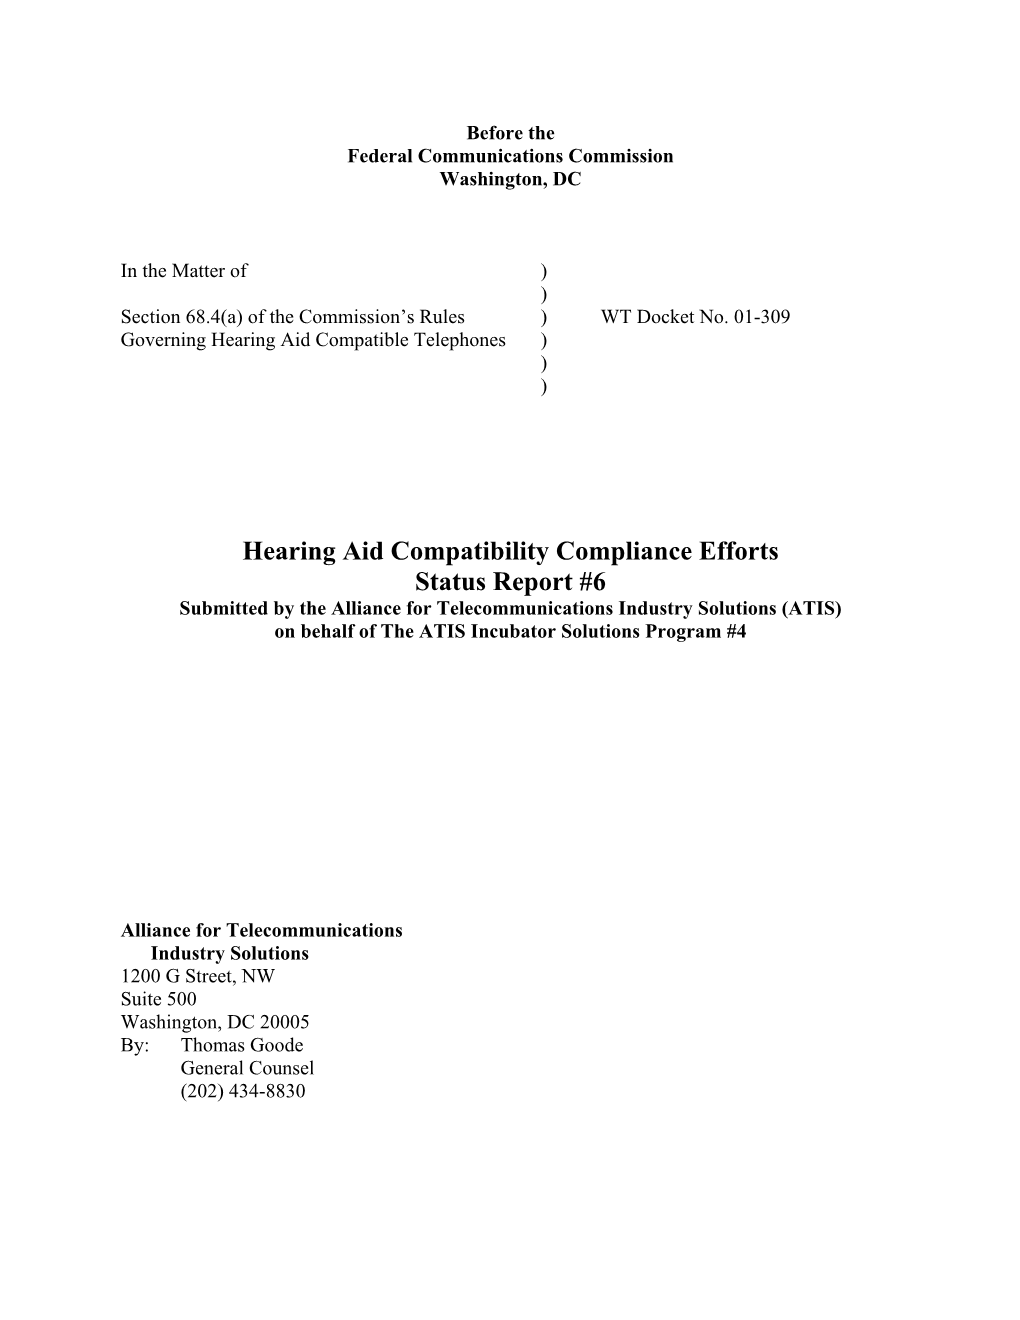 Hearing Aid Compatibility Compliance Efforts Status Report #6